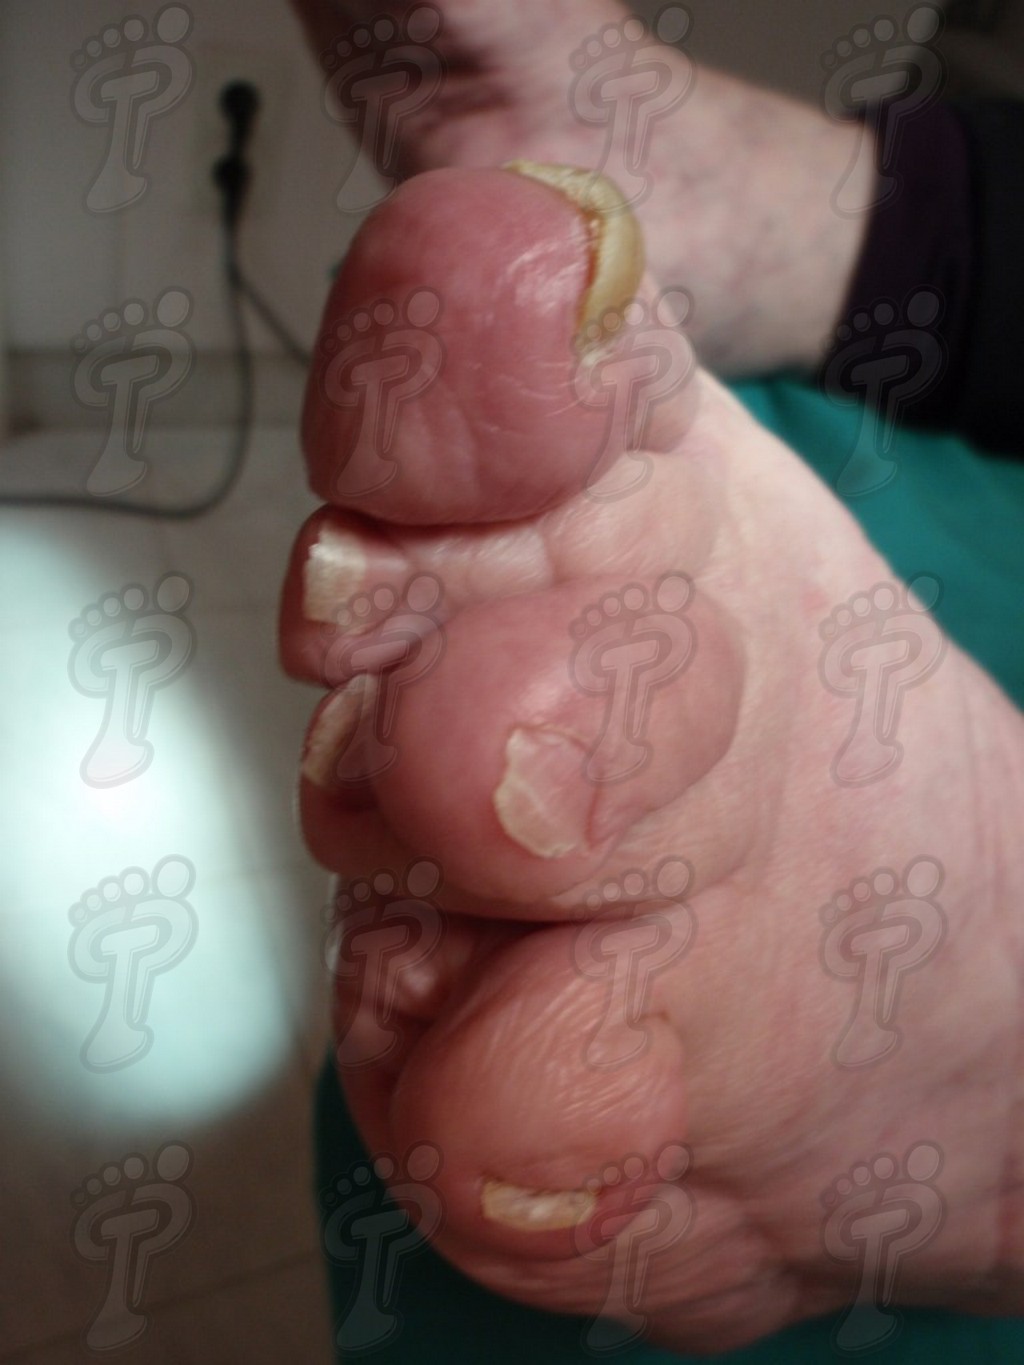 Overview of the rheumatoid foot